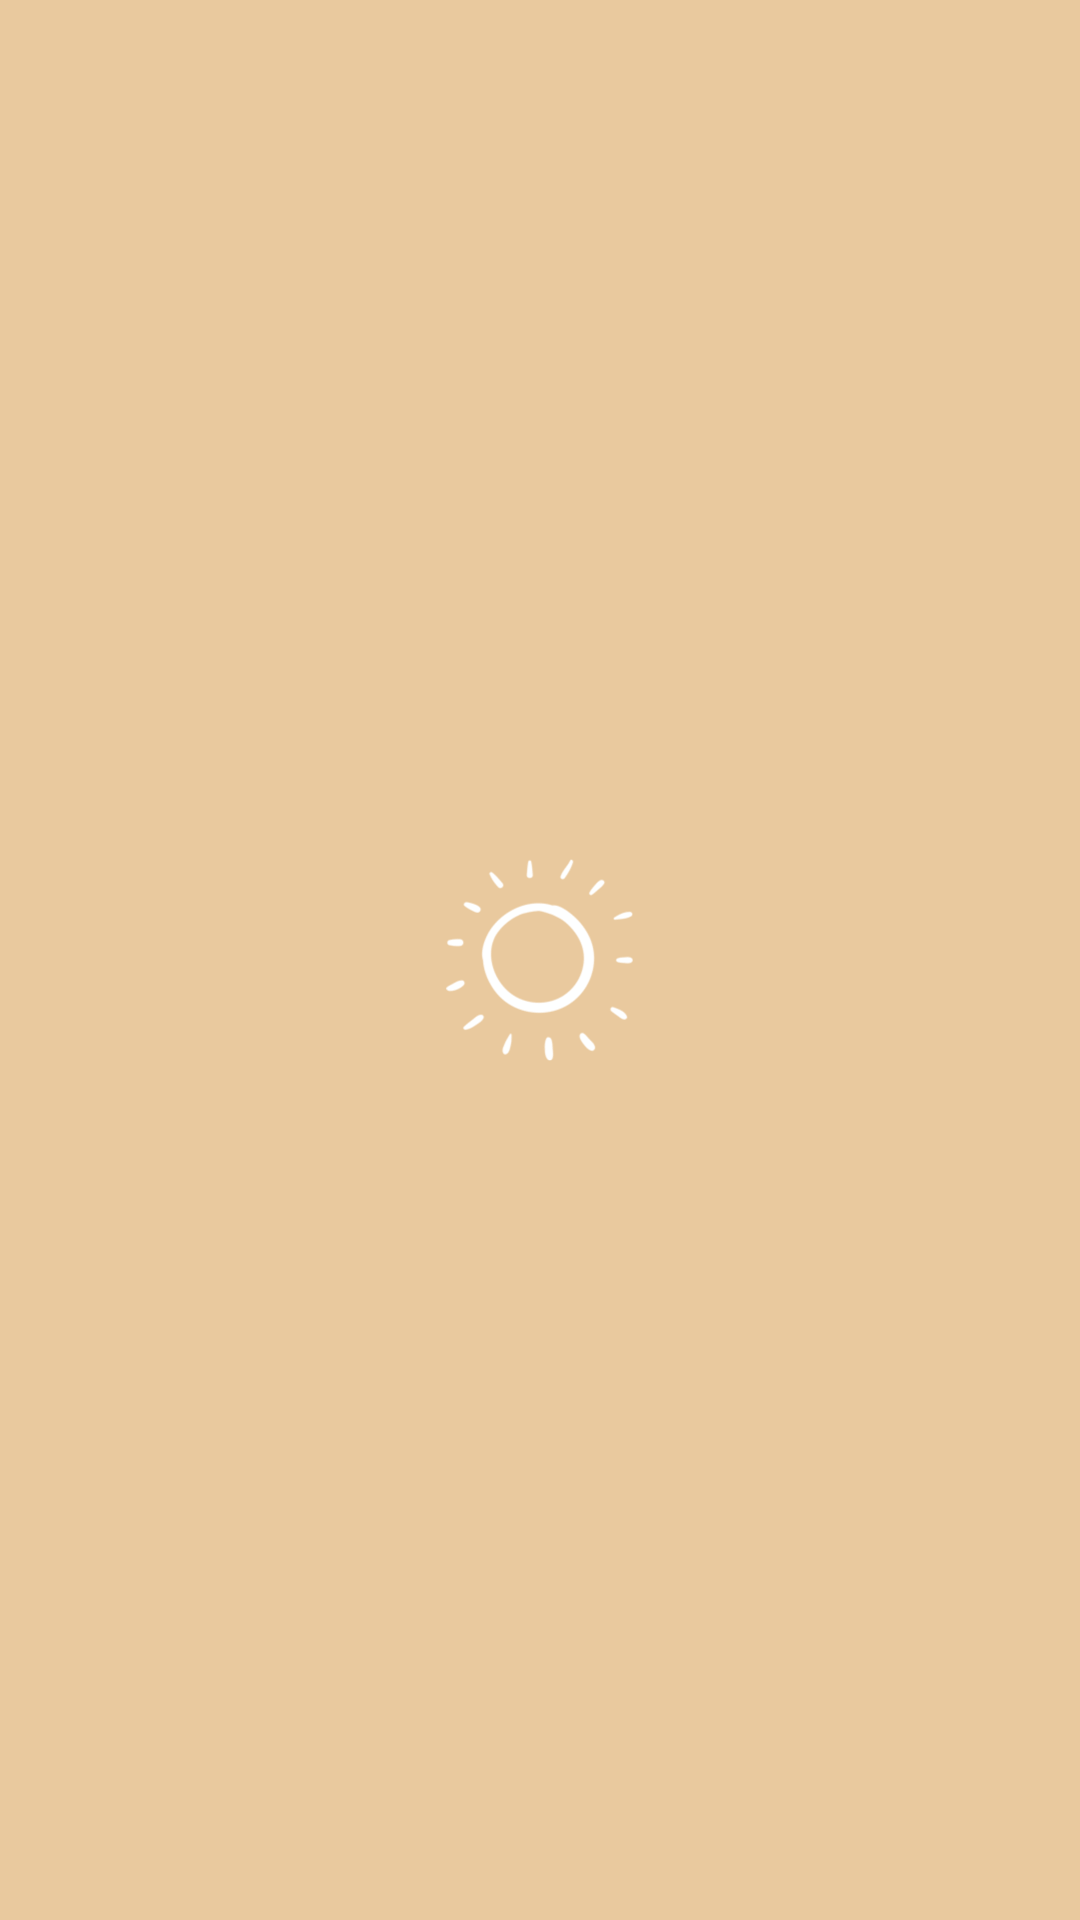 A simple sun graphic on a light brown background - Minimalist